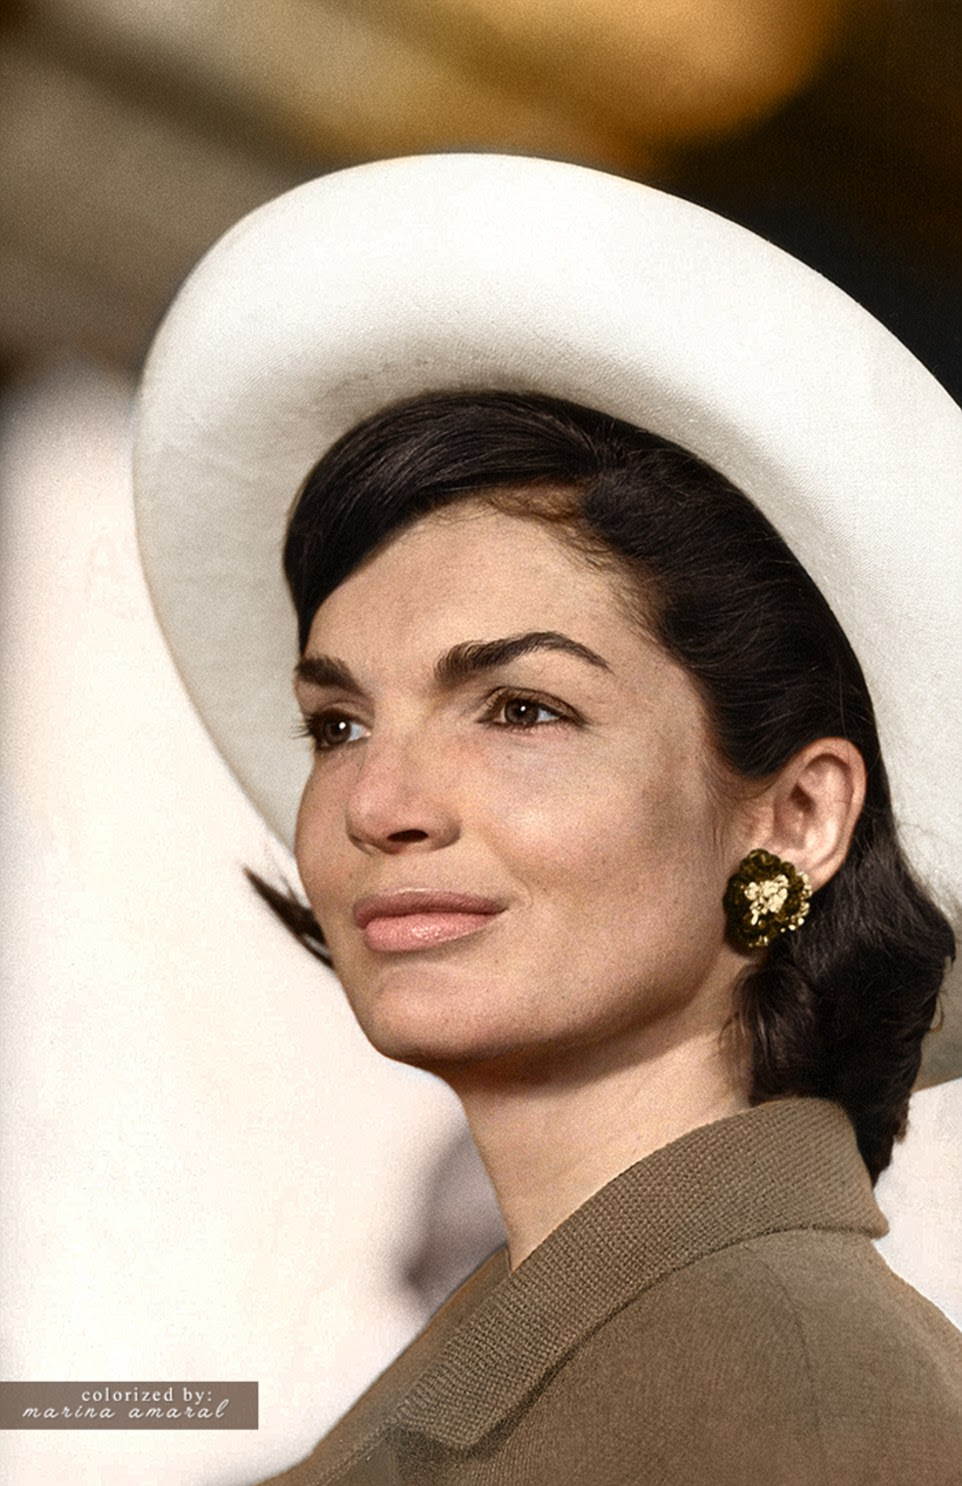 Elegant: Jacqueline Lee 'Jackie' Kennedy Onassis was the wife of the 35th President of the United States, John F. Kennedy, and First Lady of the United States during his presidency from 1961 until his assassination in 1963